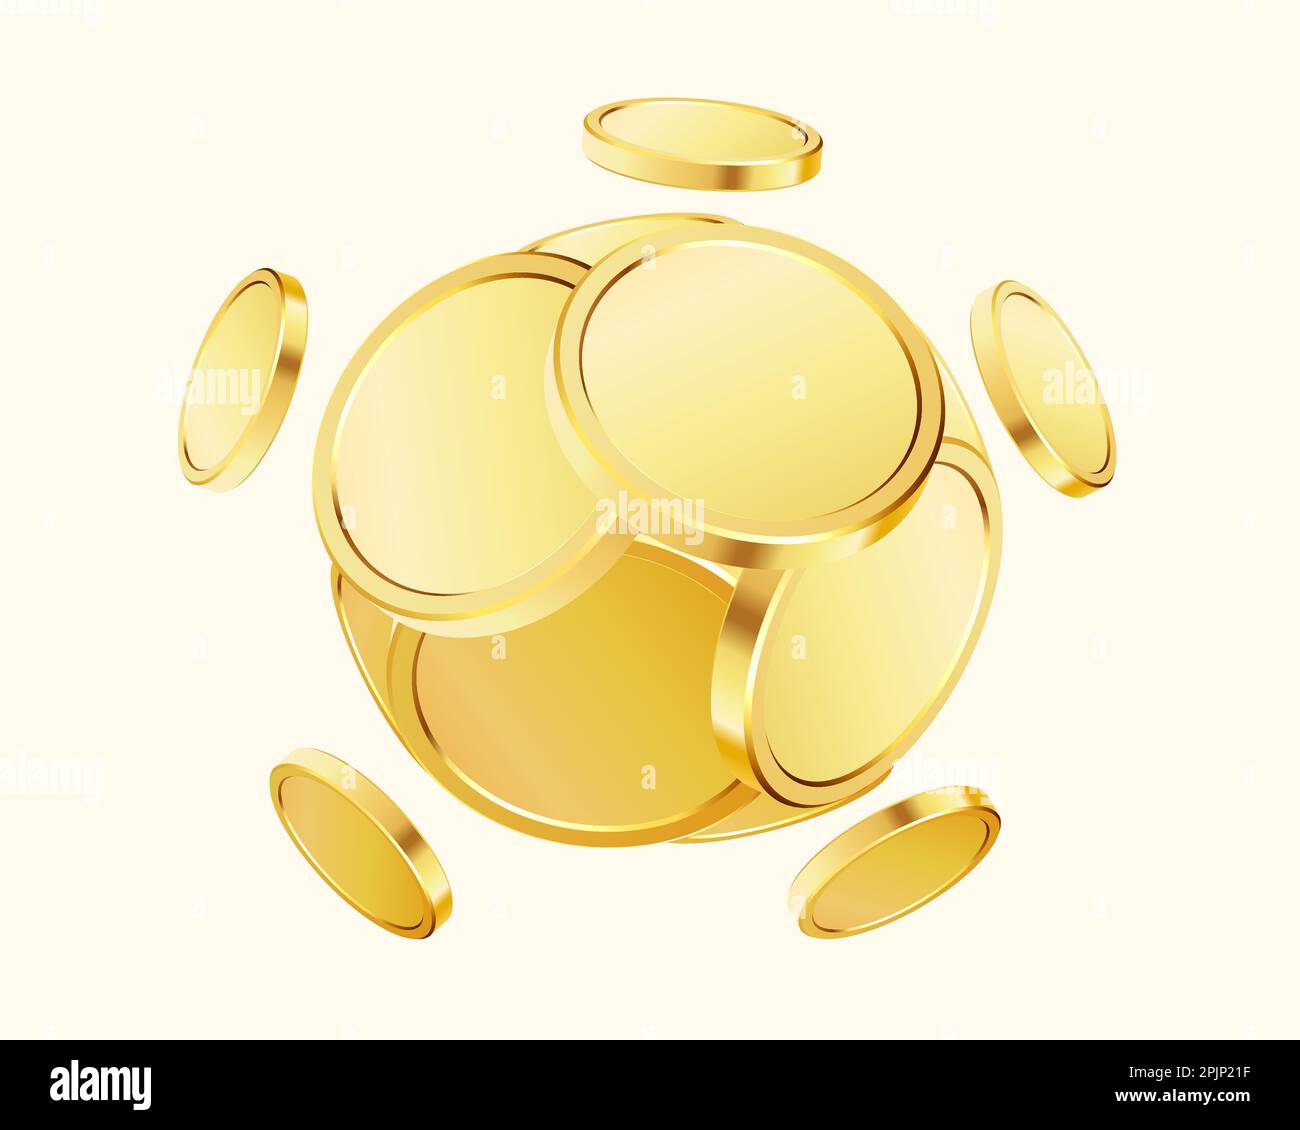 Golden coins sphere or ball shape. Casino jackpot or win concept. Gold coins on black background. Applicable for gaming, gambling fortune, jackpot ill Stock Vector